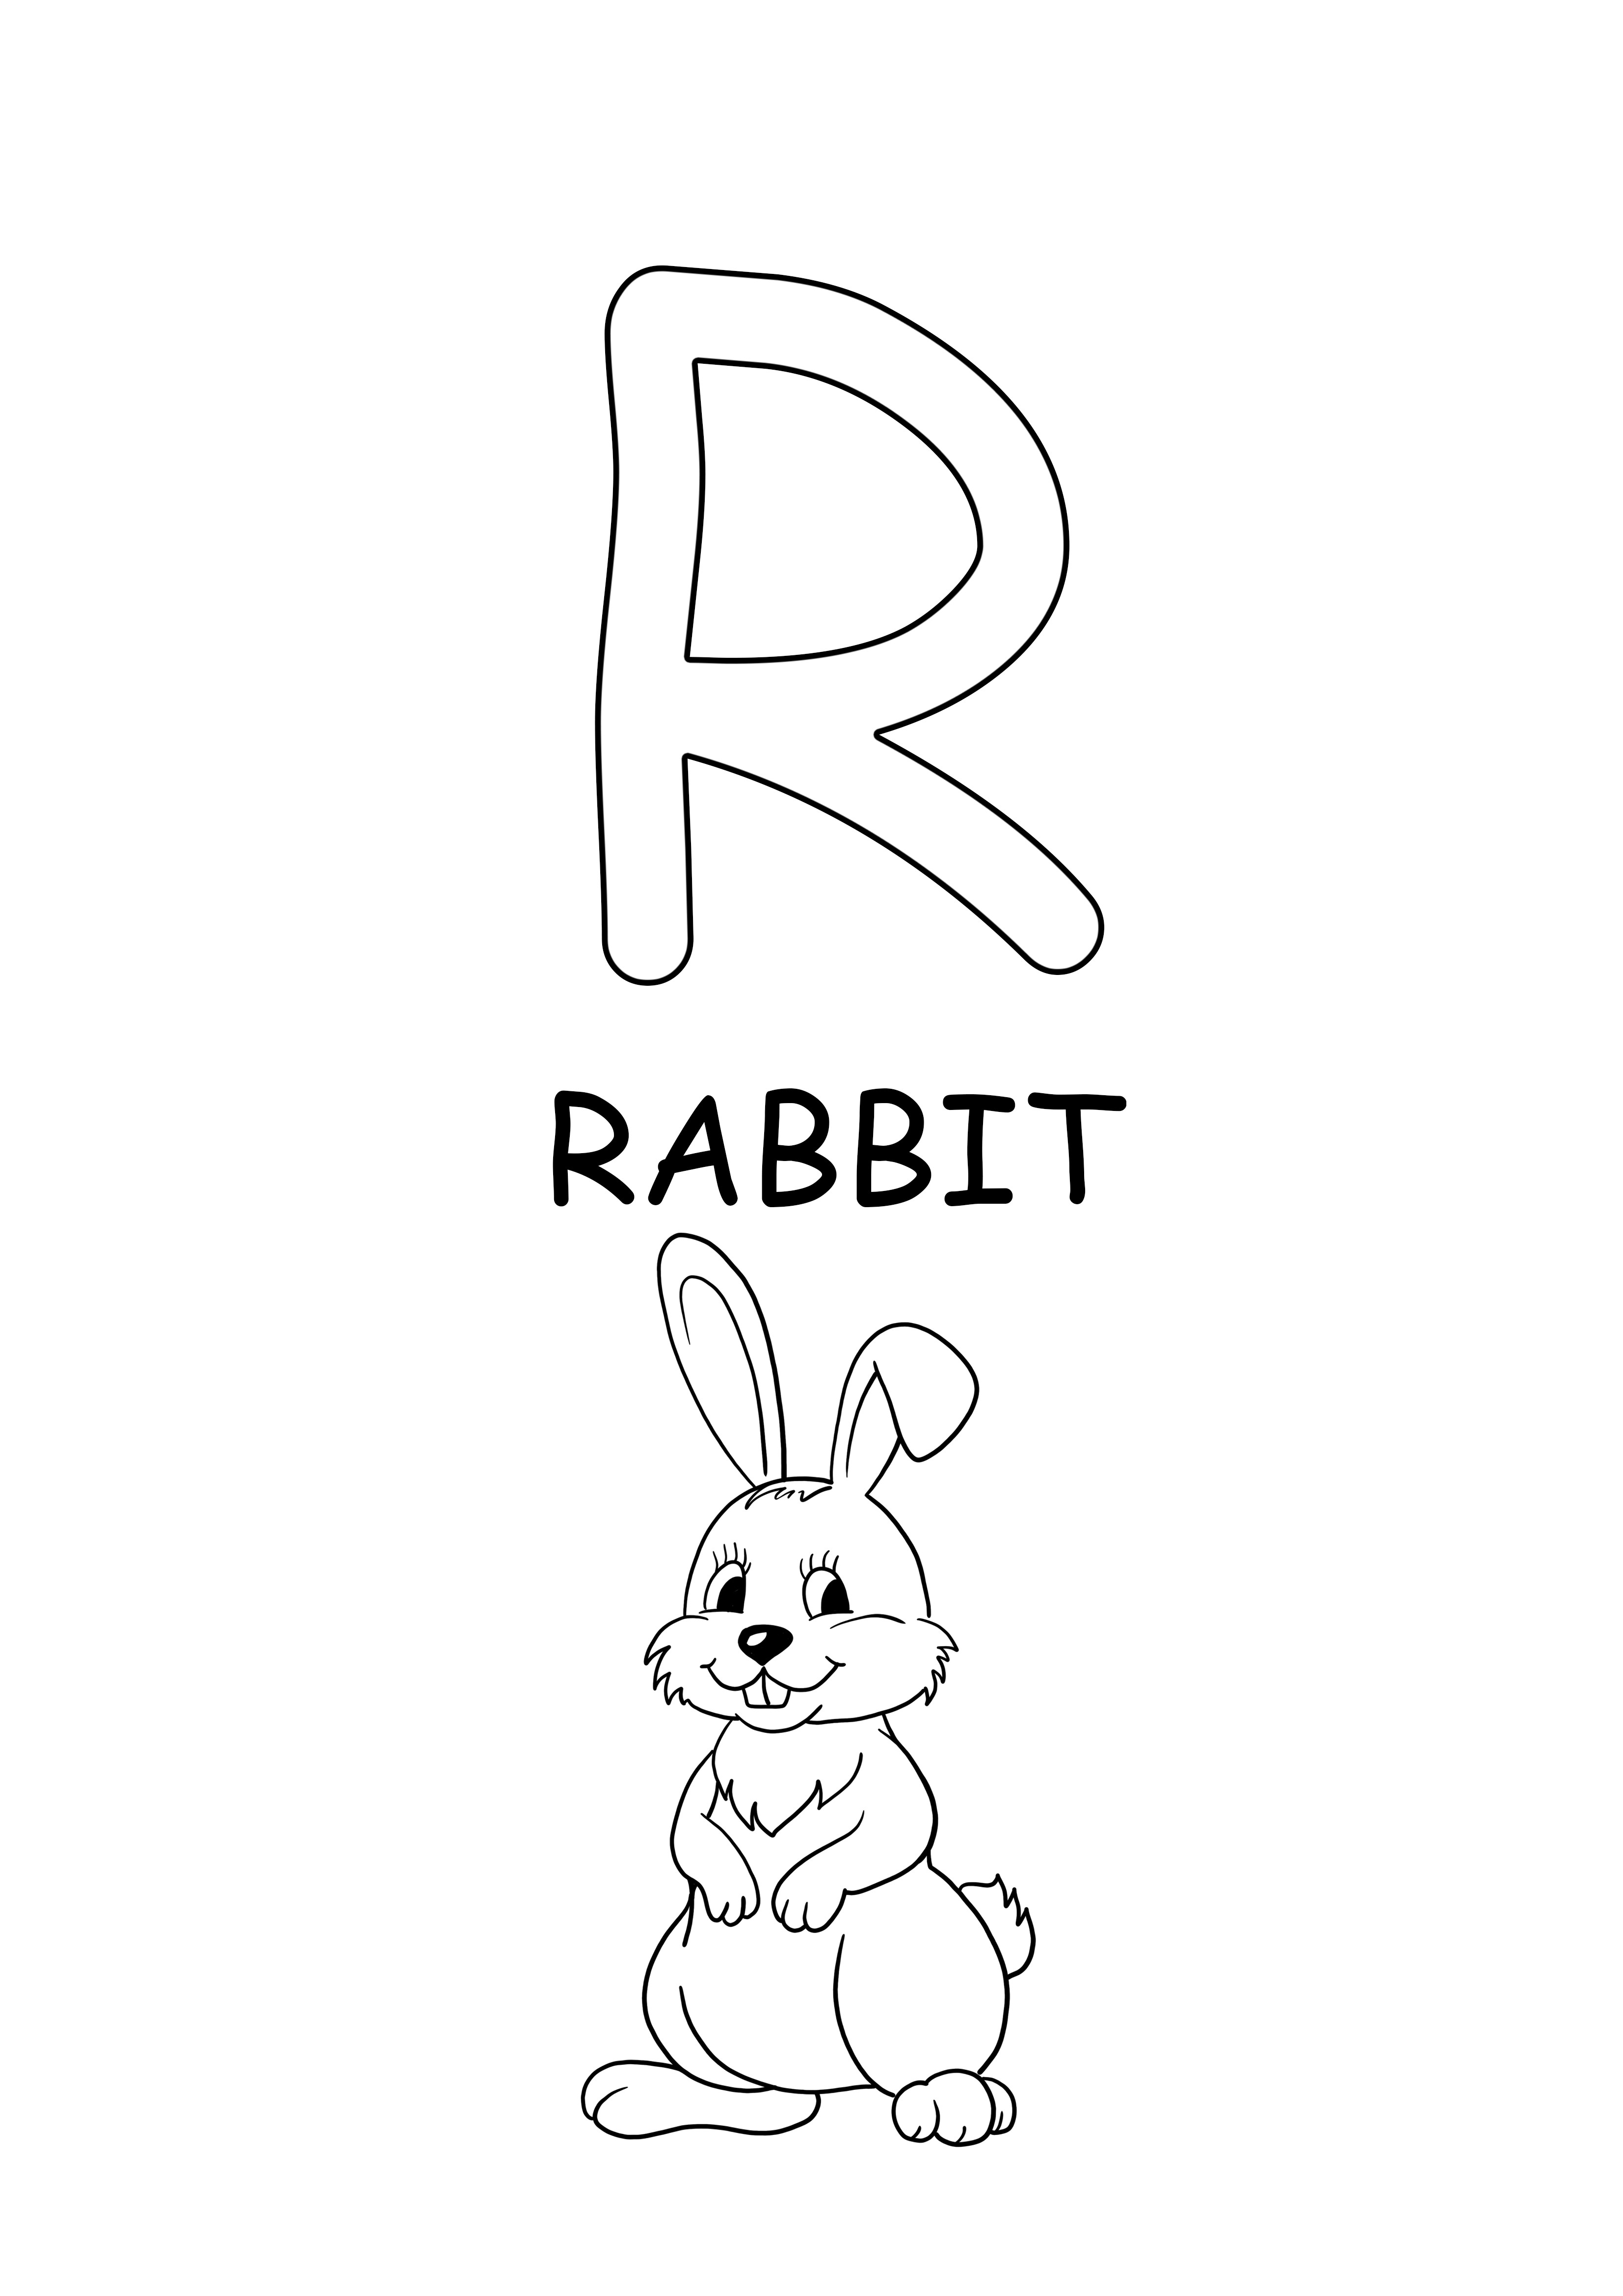 upper case word-rabbit coloring and free printable